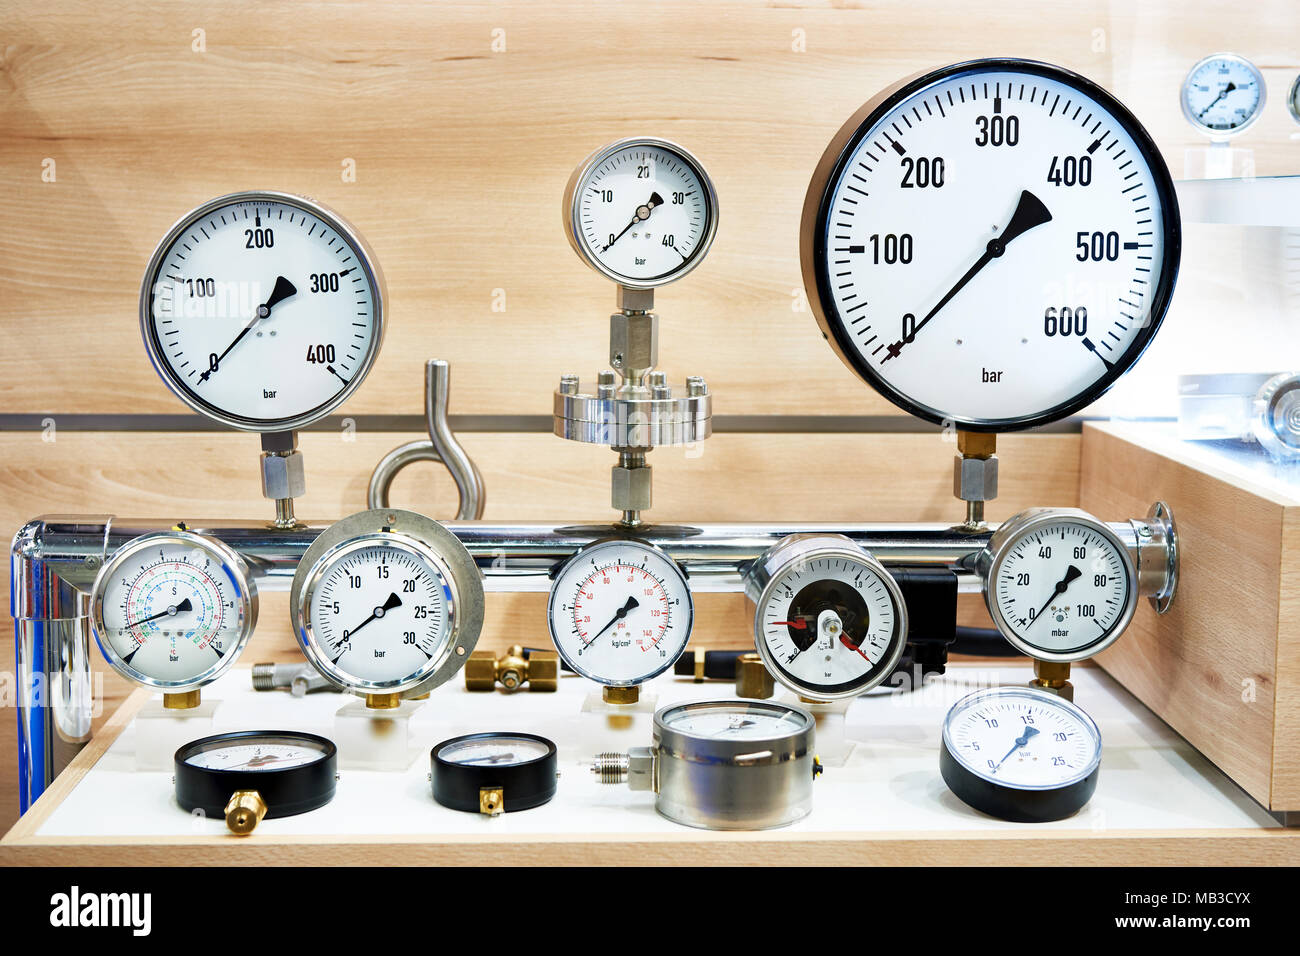 Industrial installation with manometers Stock Photo